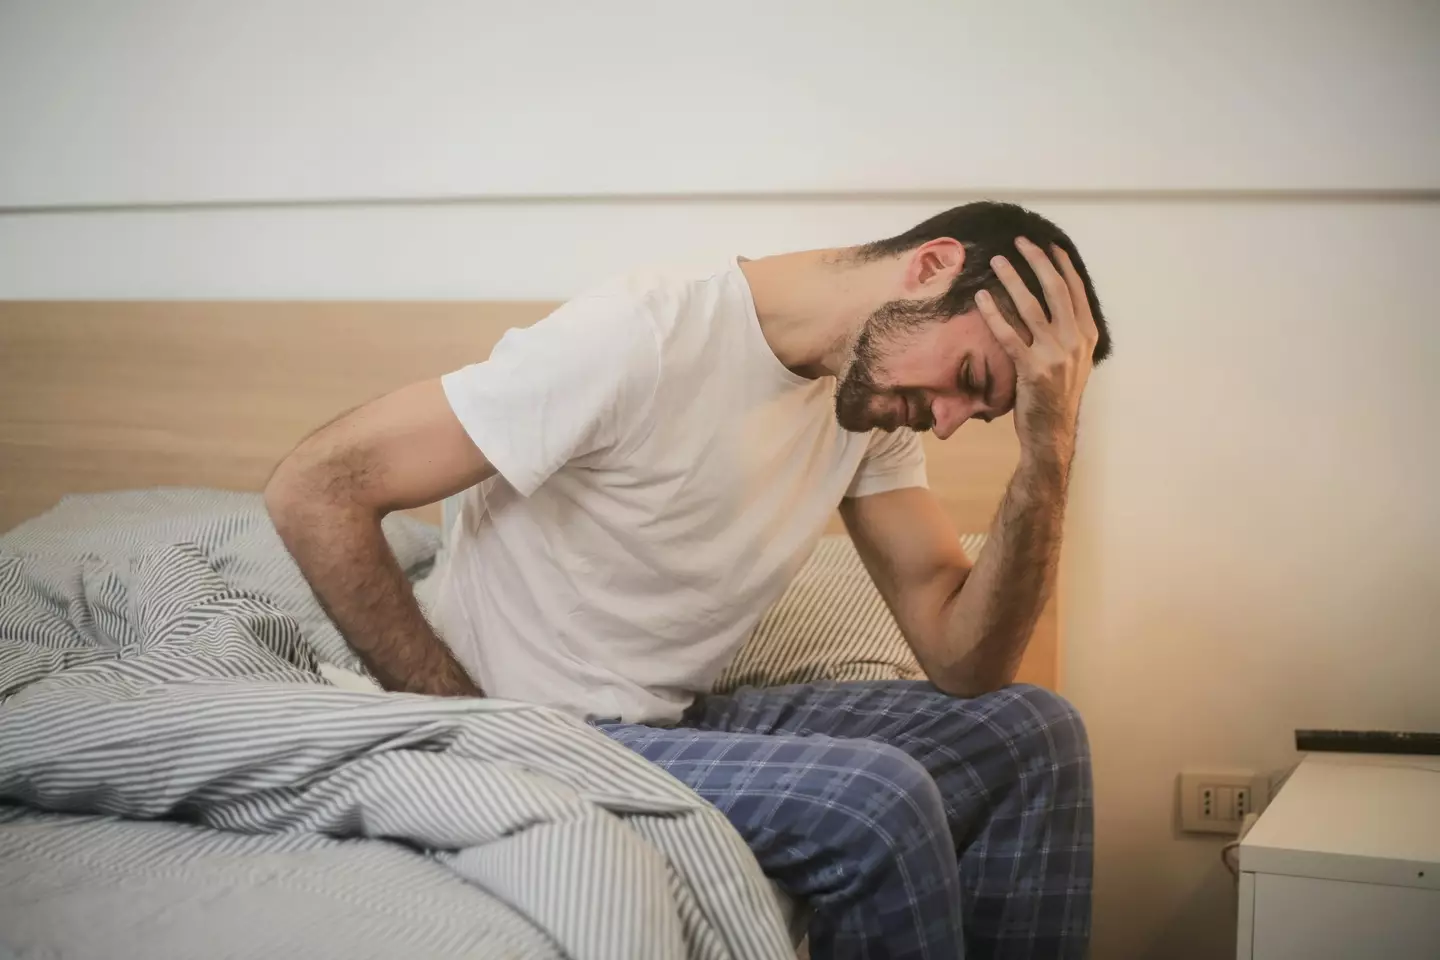 A man deeply upset getting out of bed. (pexels/Andrea Piacquadio)